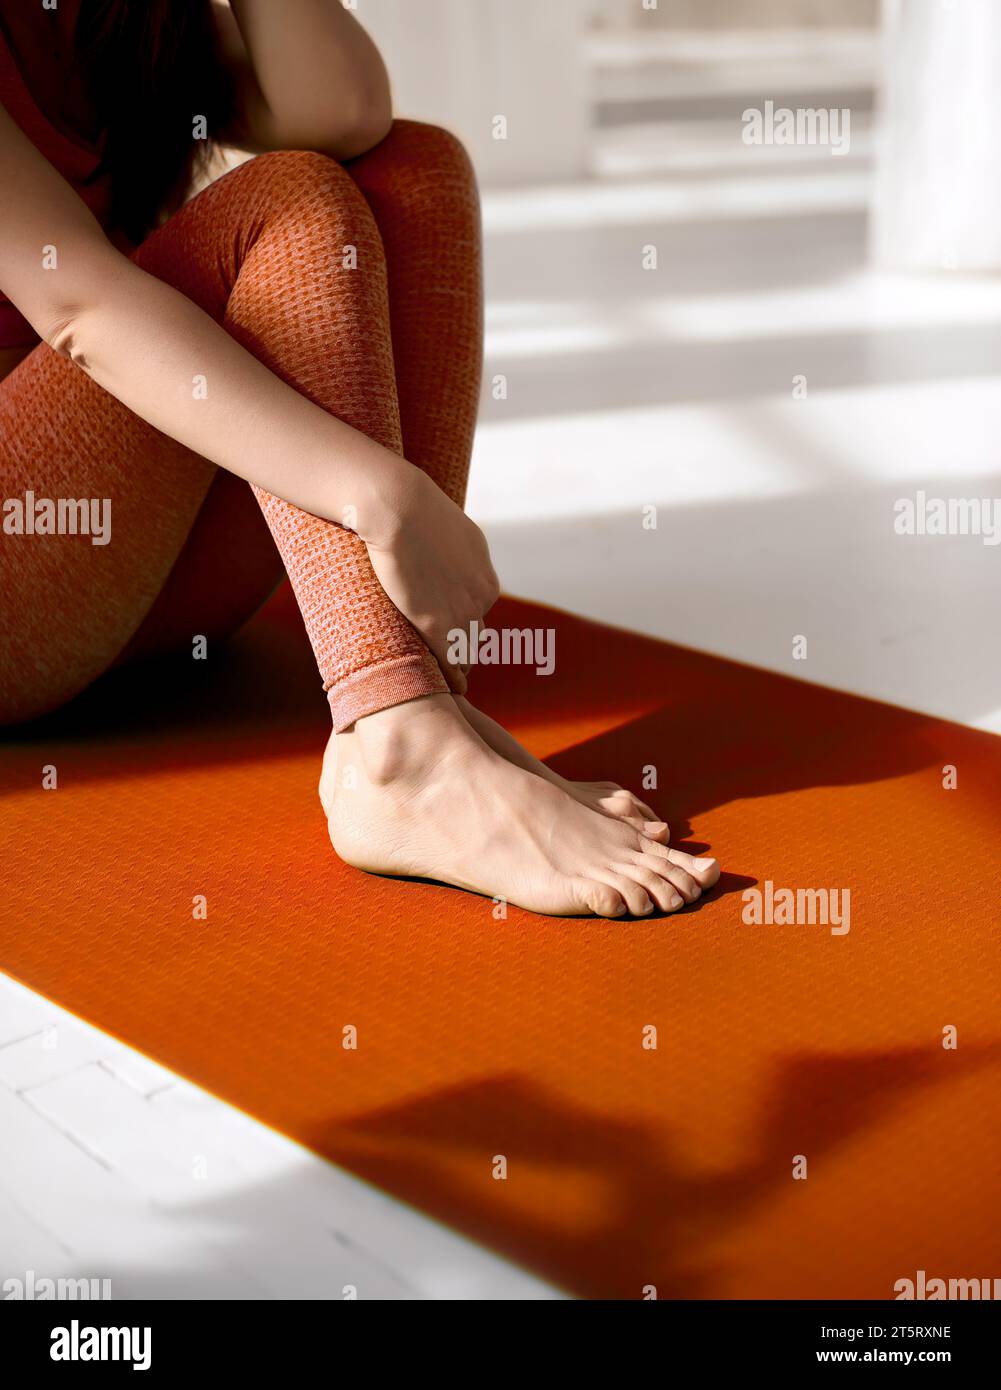 Close up photo of female feet are relaxing on an orange yoga mat. Physiotherapy, reflexology, flexibility promotion. Reducing muscle soreness, increas Stock Photo